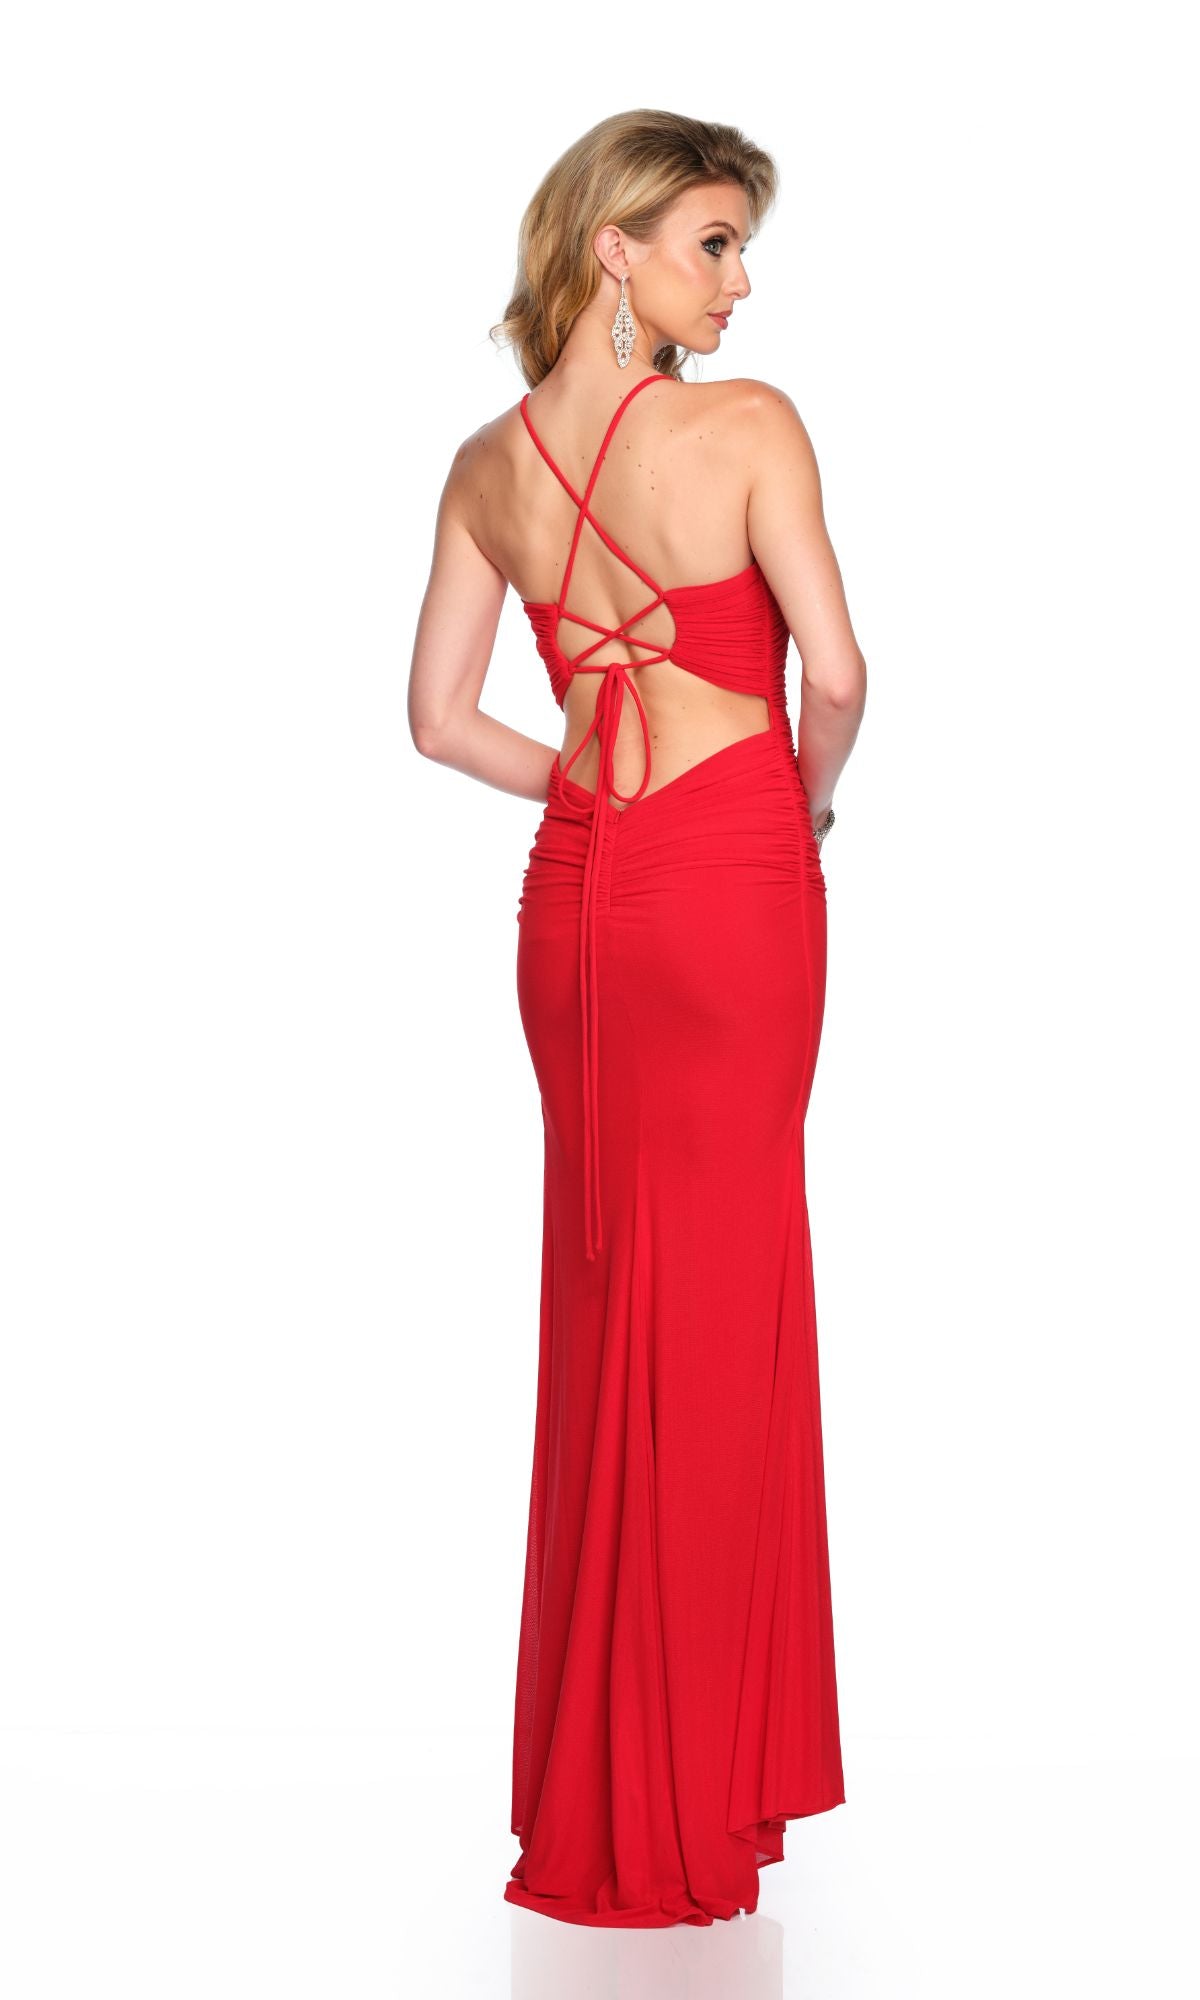 Long Formal Dress 11648 by Dave and Johnny